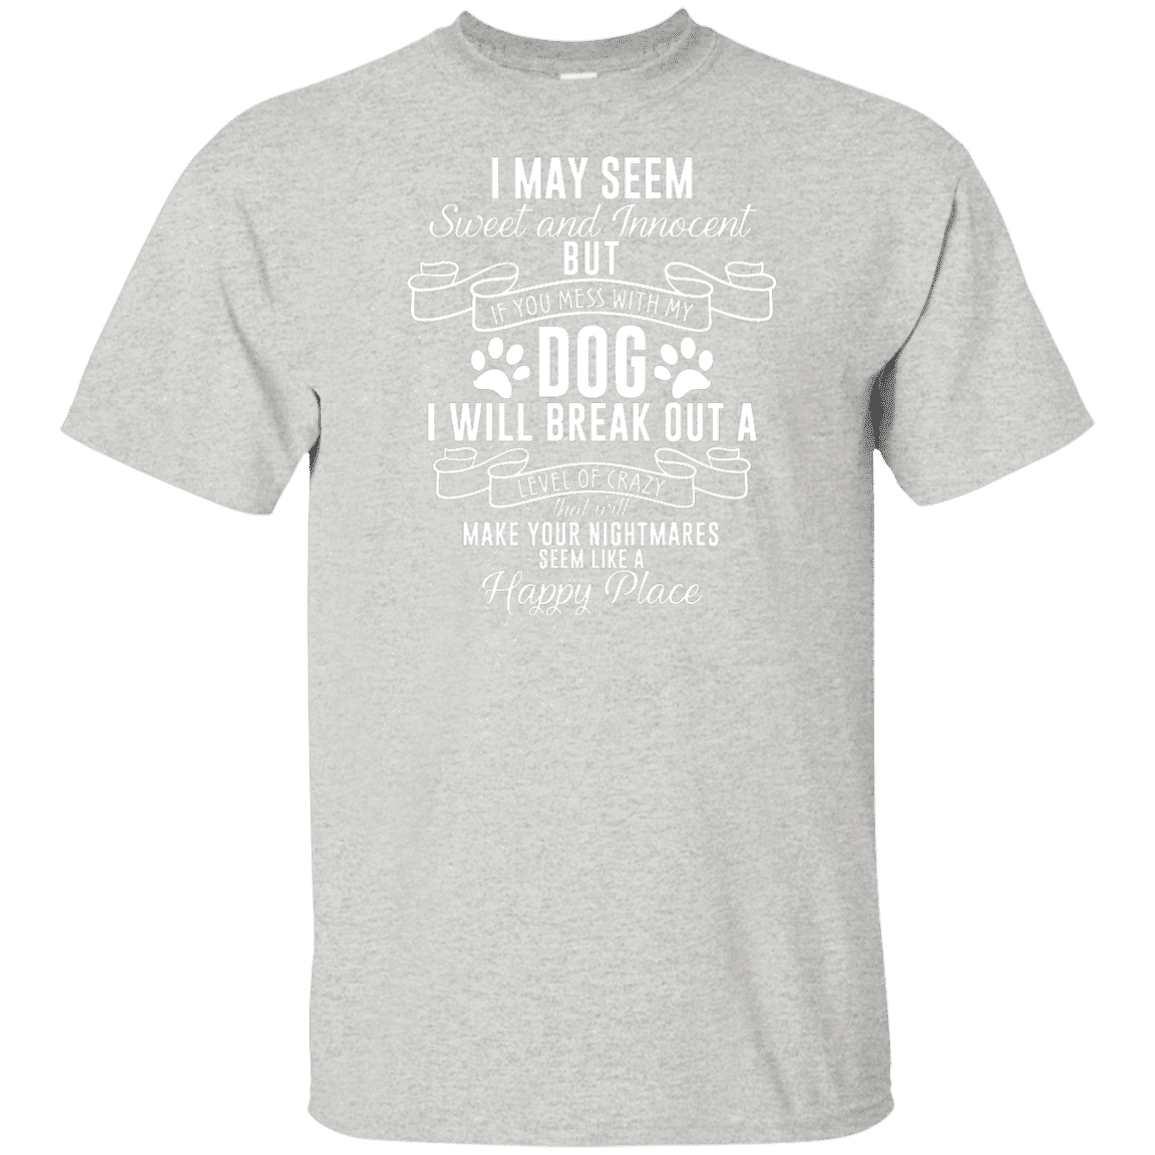 I May Seem Sweet And Innocent - Youth T Shirt.